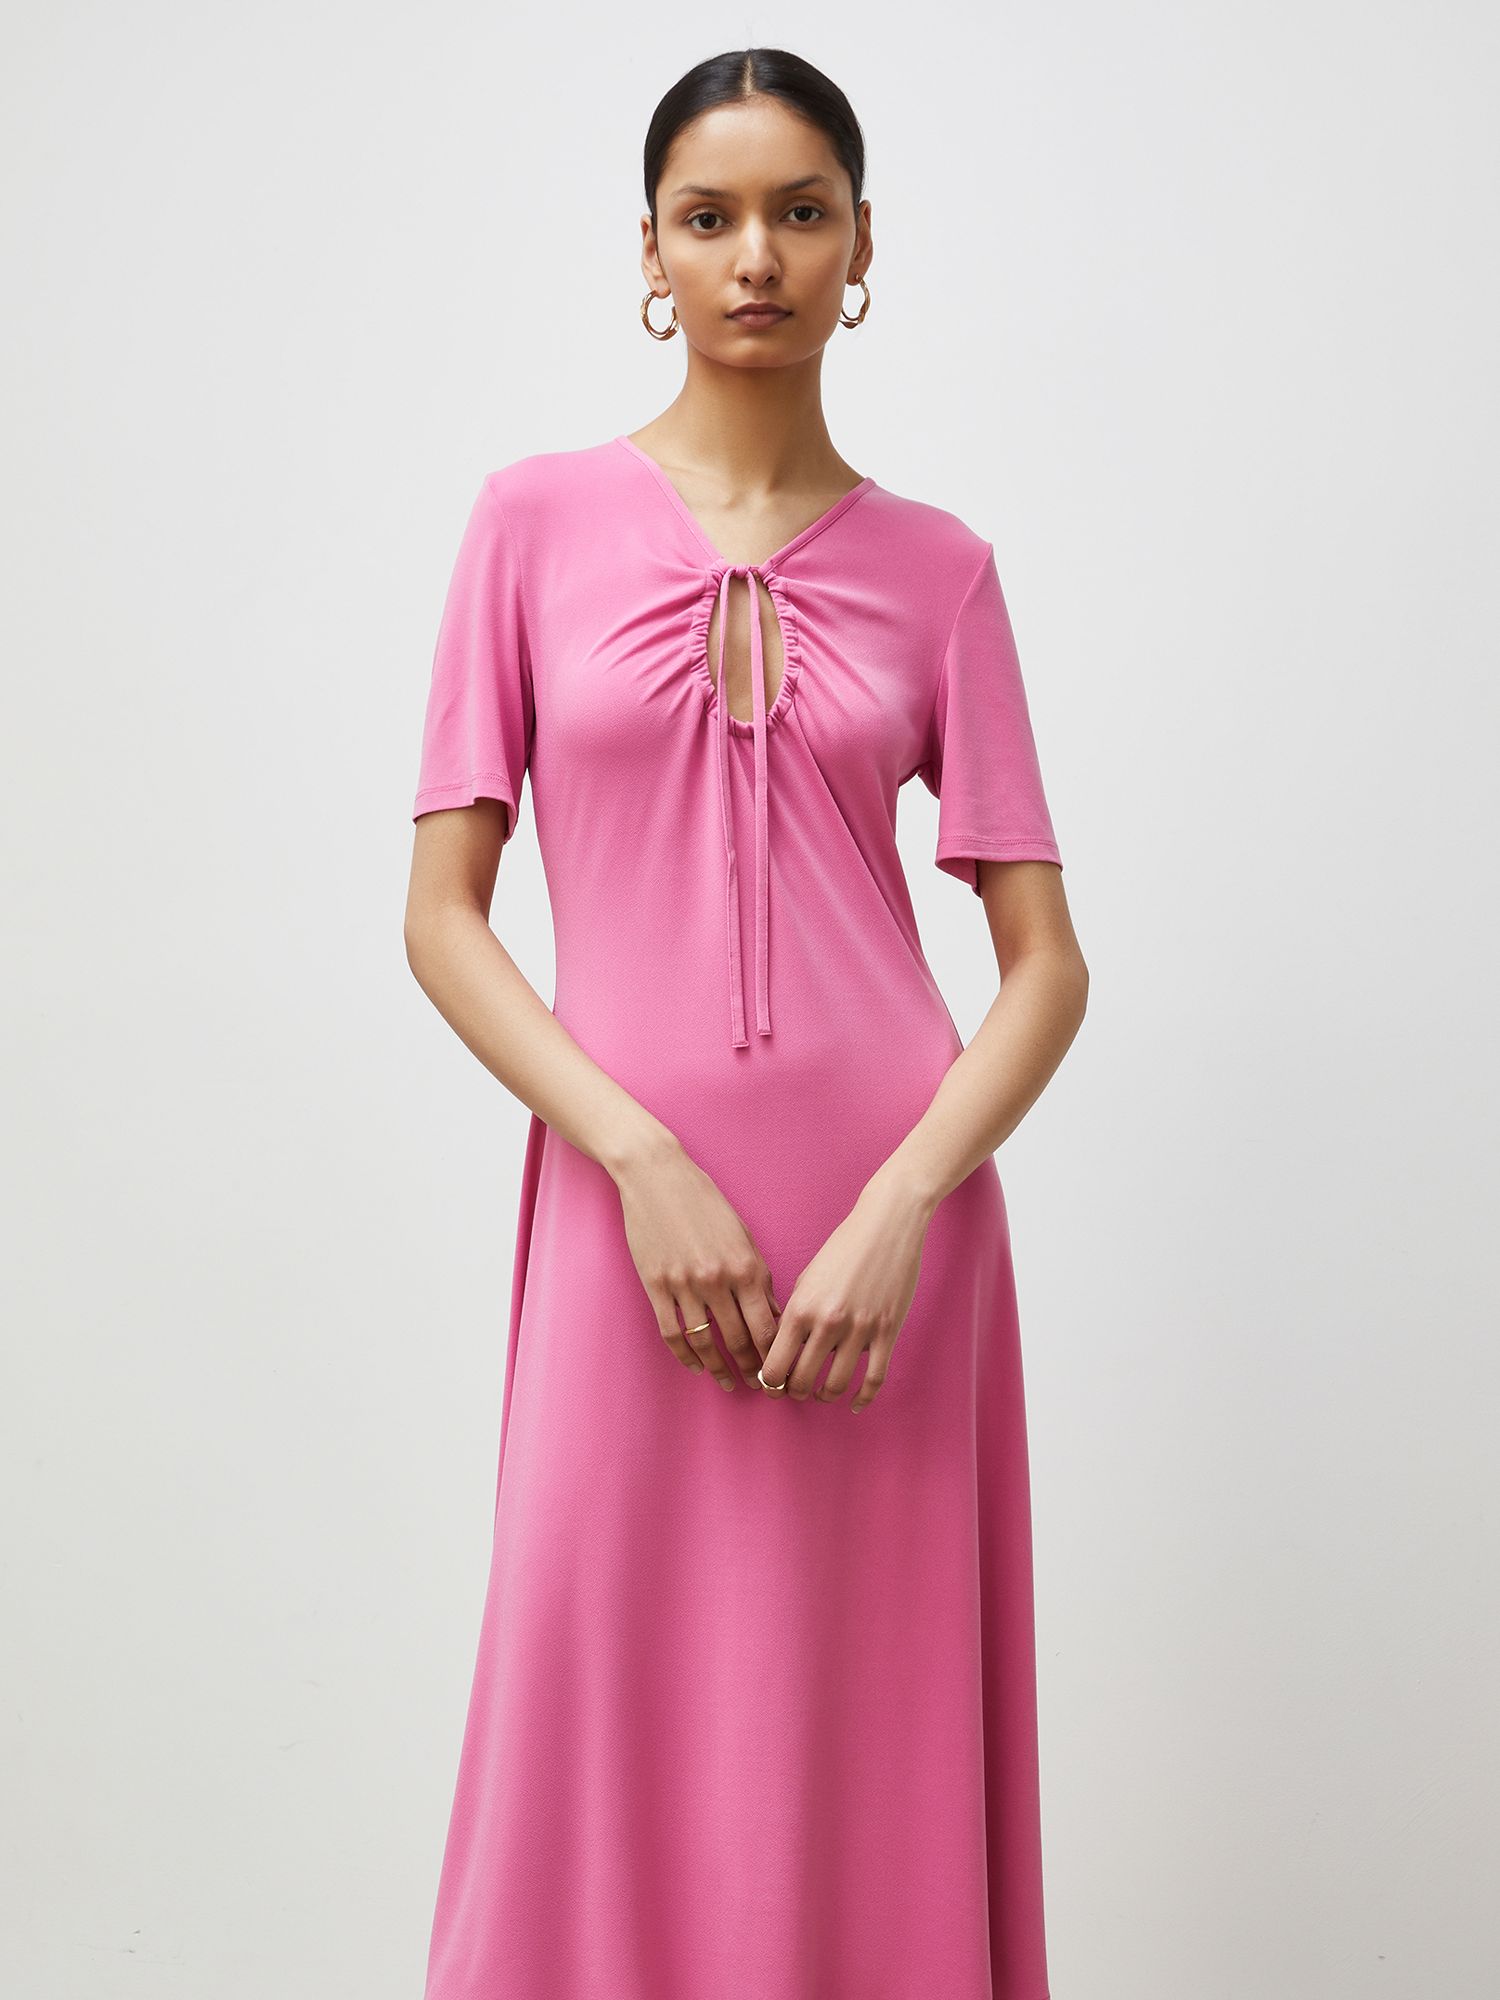 Finery Alice Cut Out Front Midi Dress, Pink at John Lewis & Partners